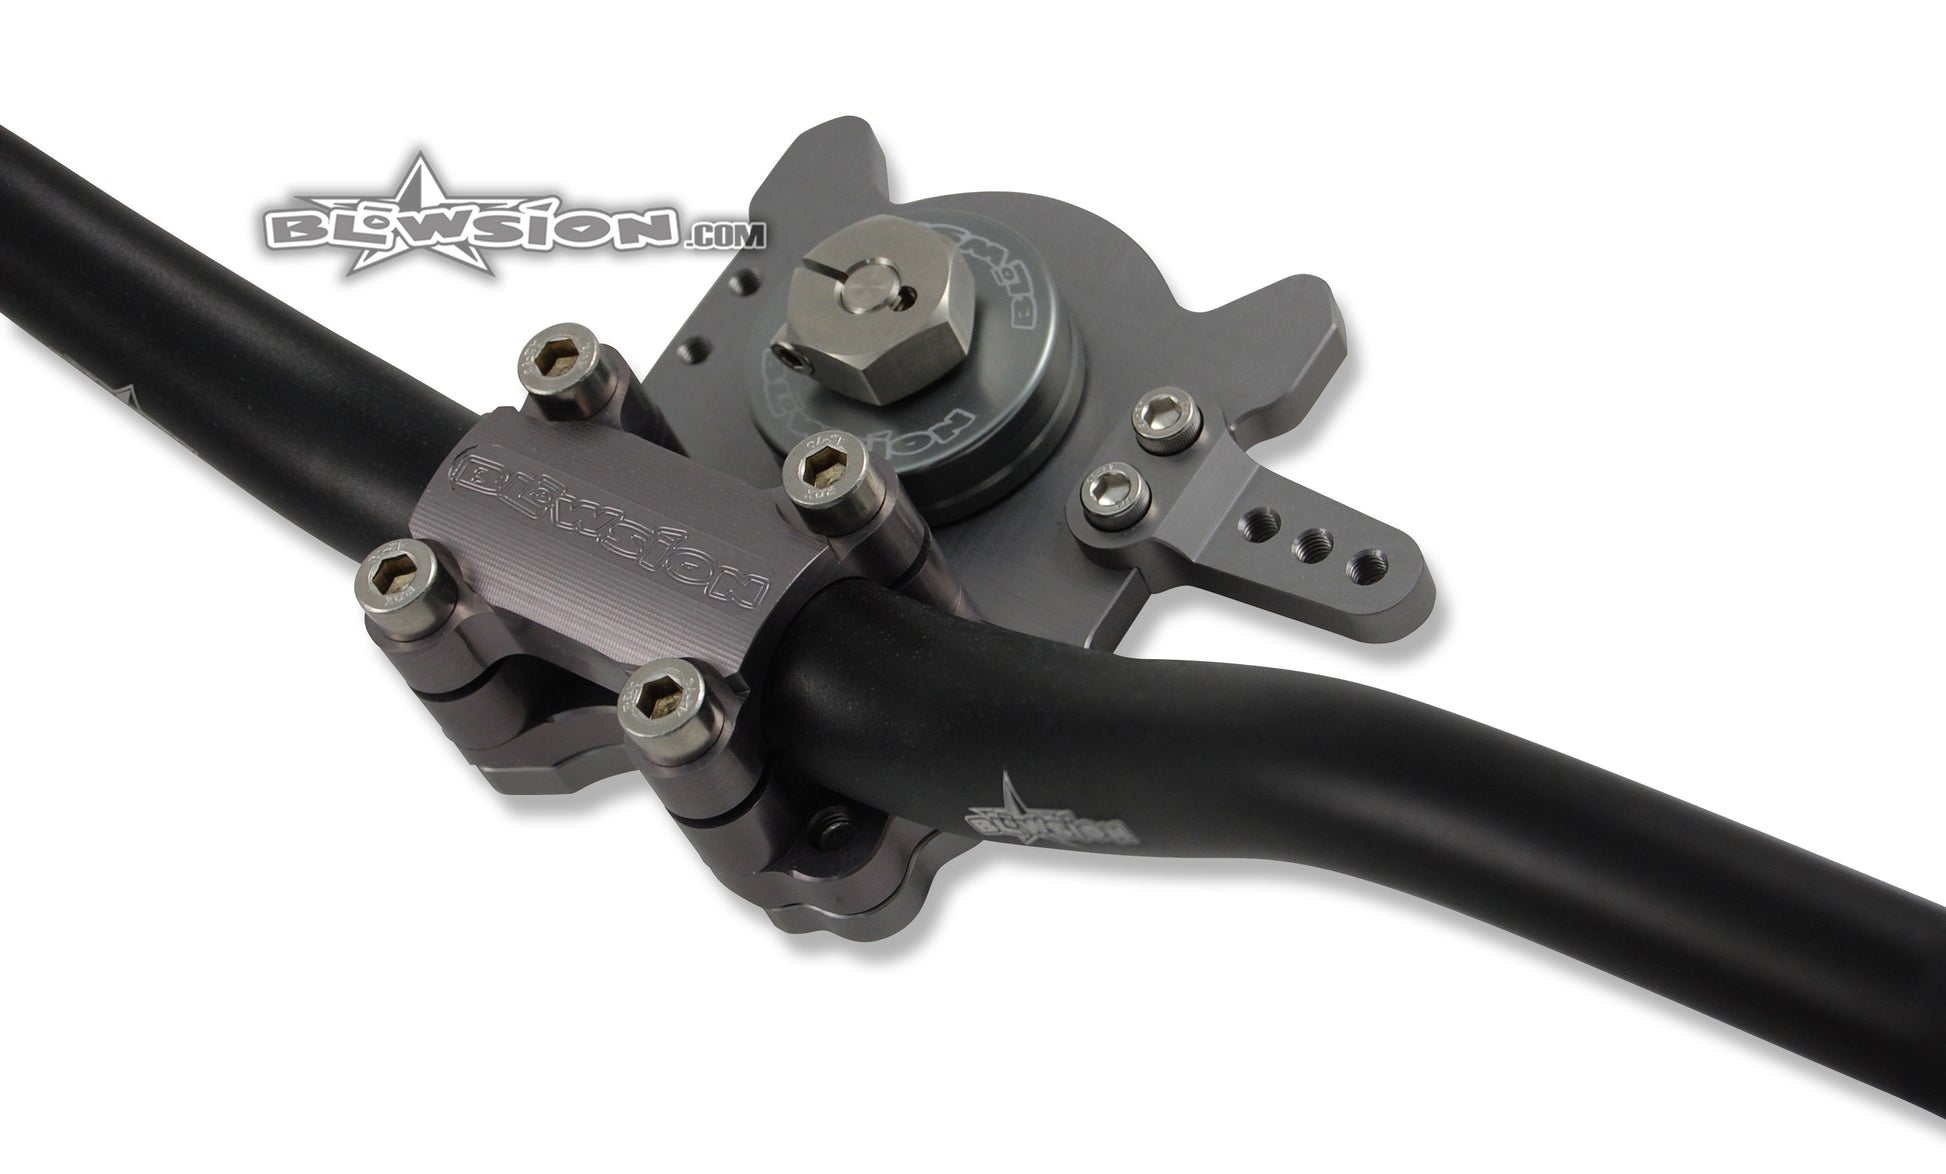 Blowsion Steering System 1-1/8" Fat - Anodized Gun-Metal (fat riser bars sold separately)